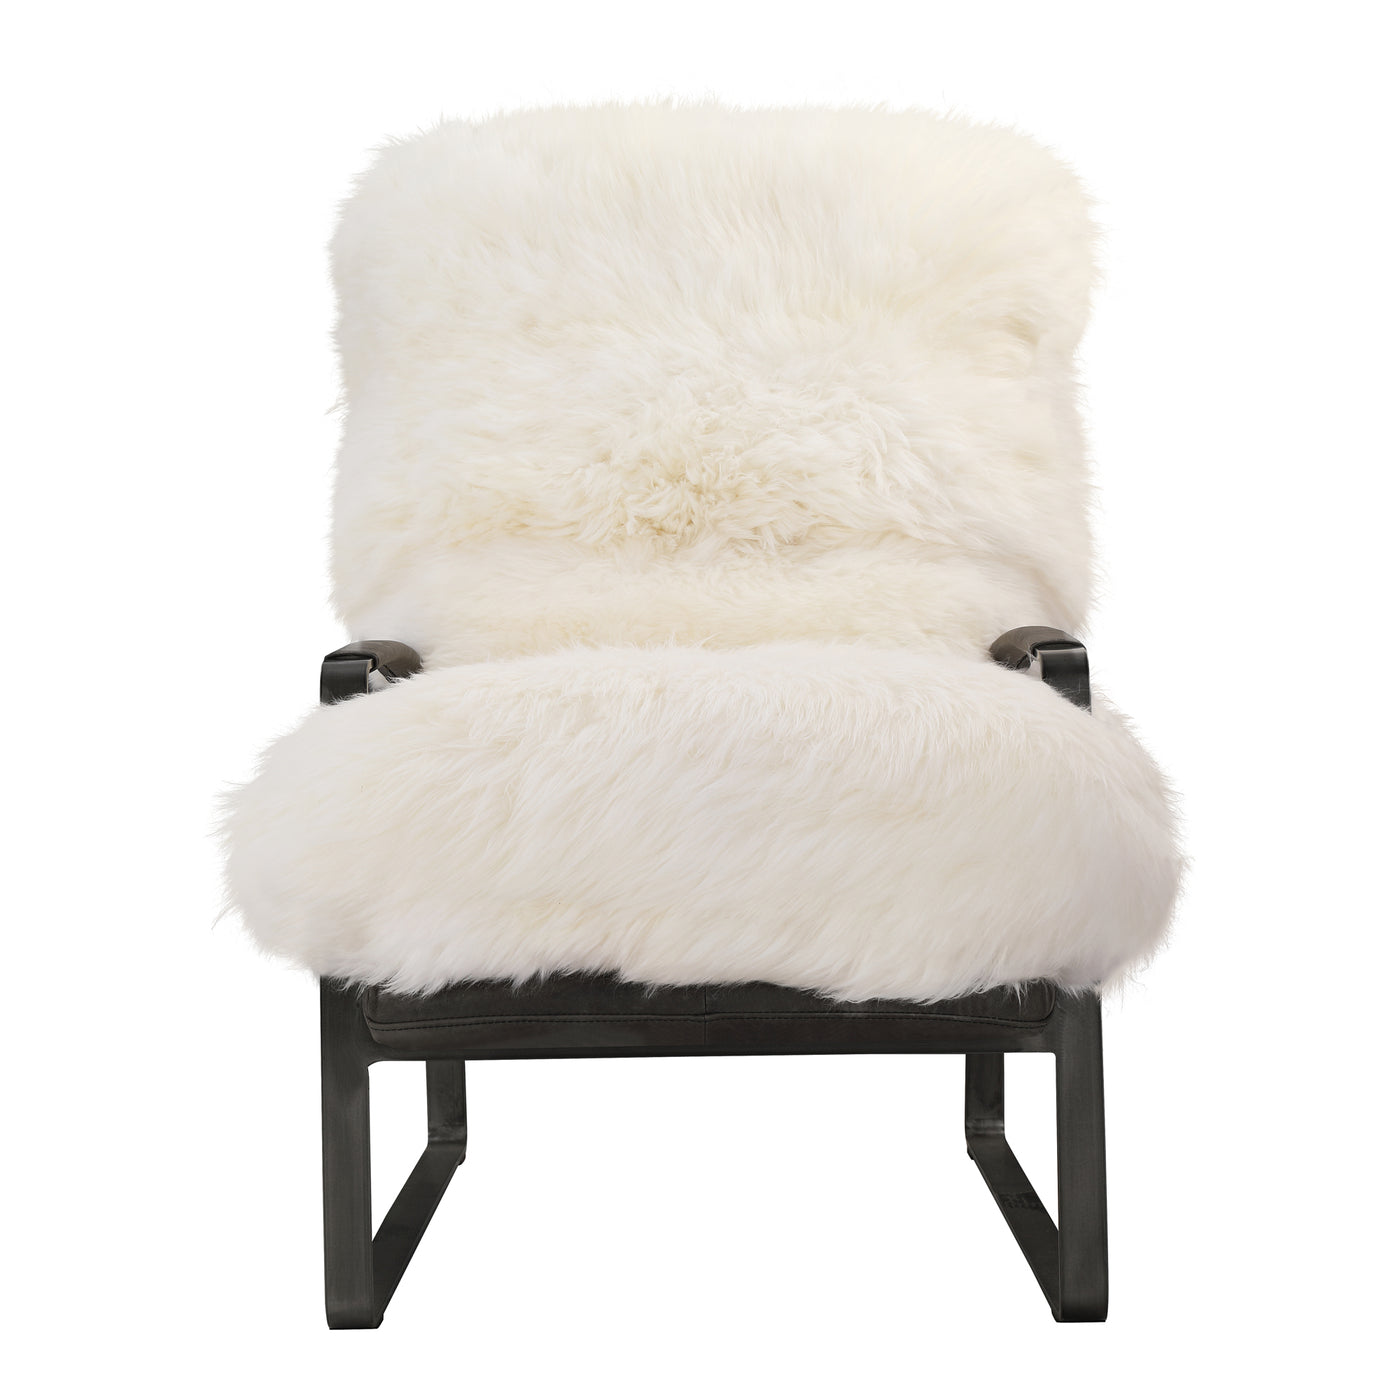 Fall in love with our cozy Hanly accent chair. Natural, long hair sheepskin makes sitting in this chair feel like a dream....